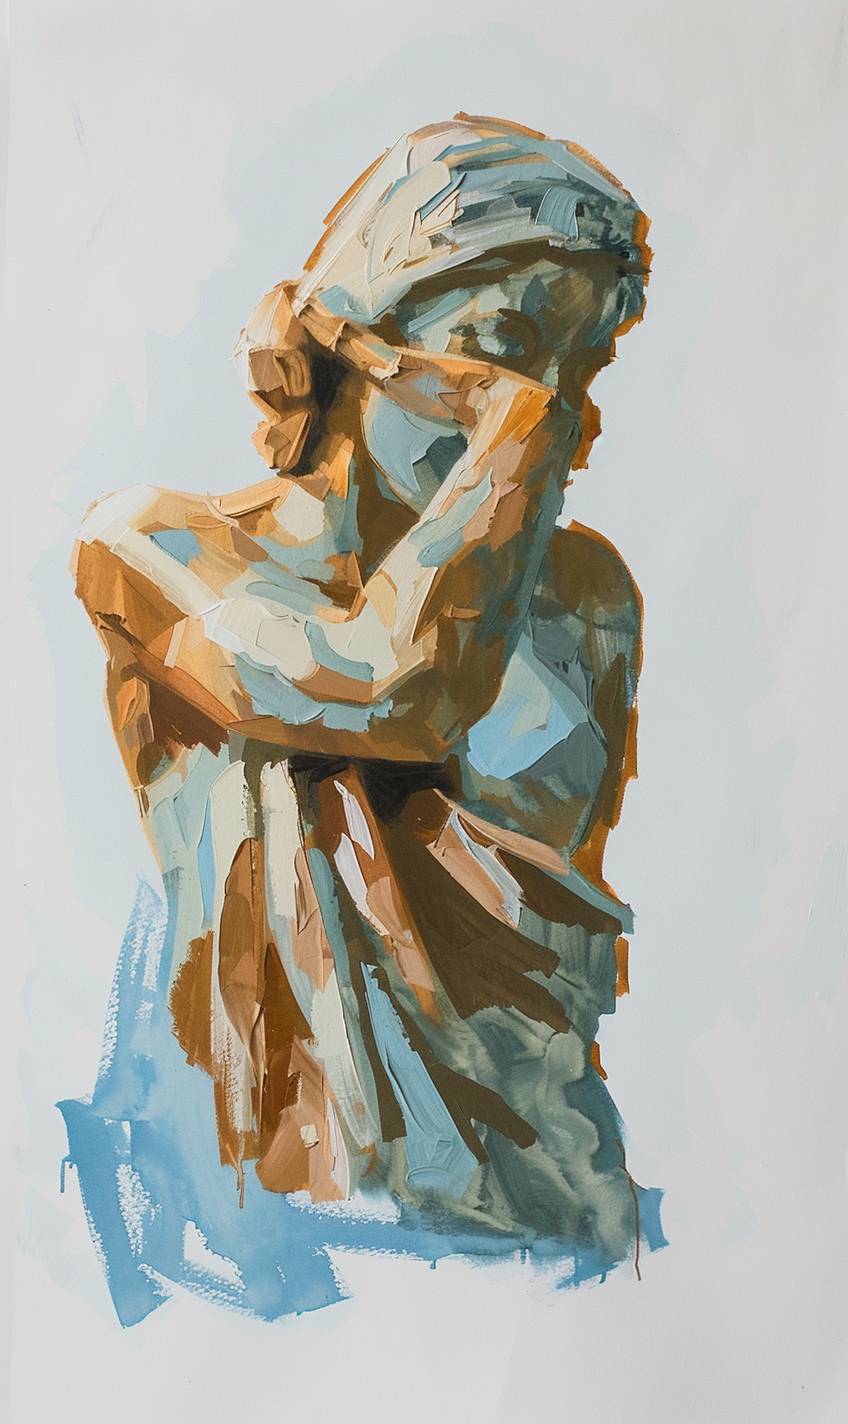 Simple, small, minimalist, cool, and fun 2-color gouache painting of a sculpture of a woman from antiquity